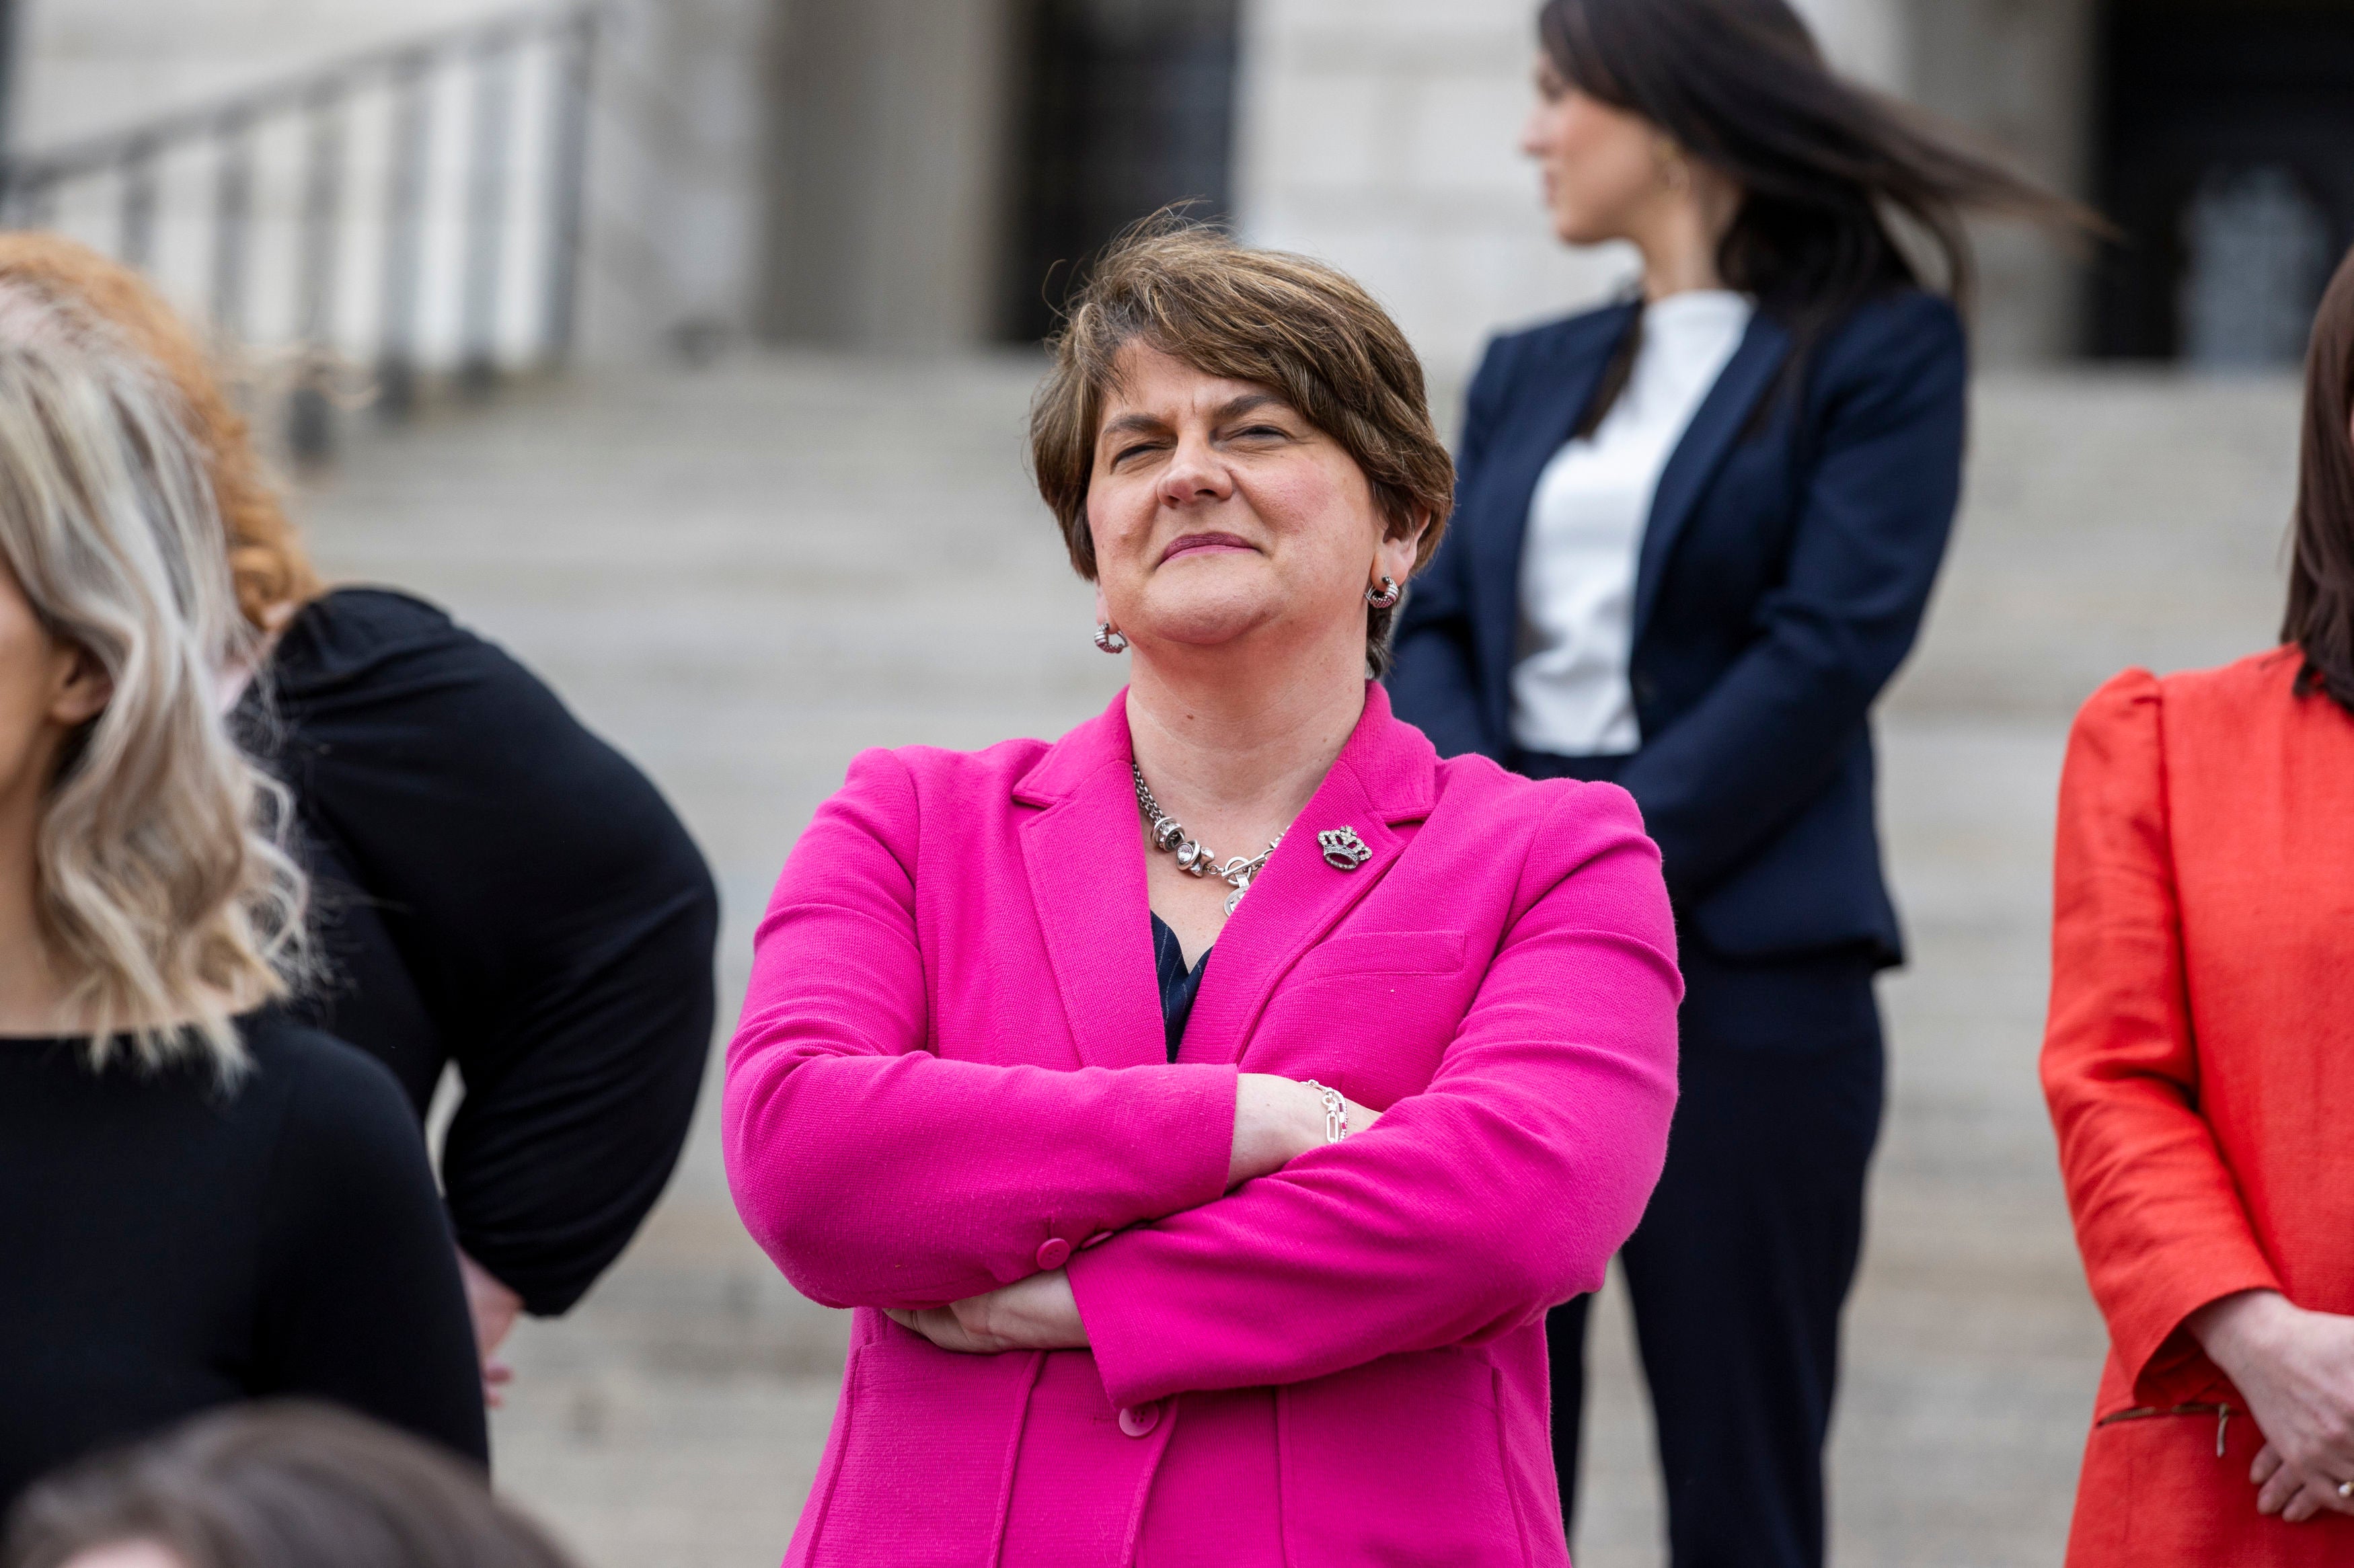 Arlene Foster was Northern Ireland’s first minister since January 2020, and previously from January 2016 to January 2017